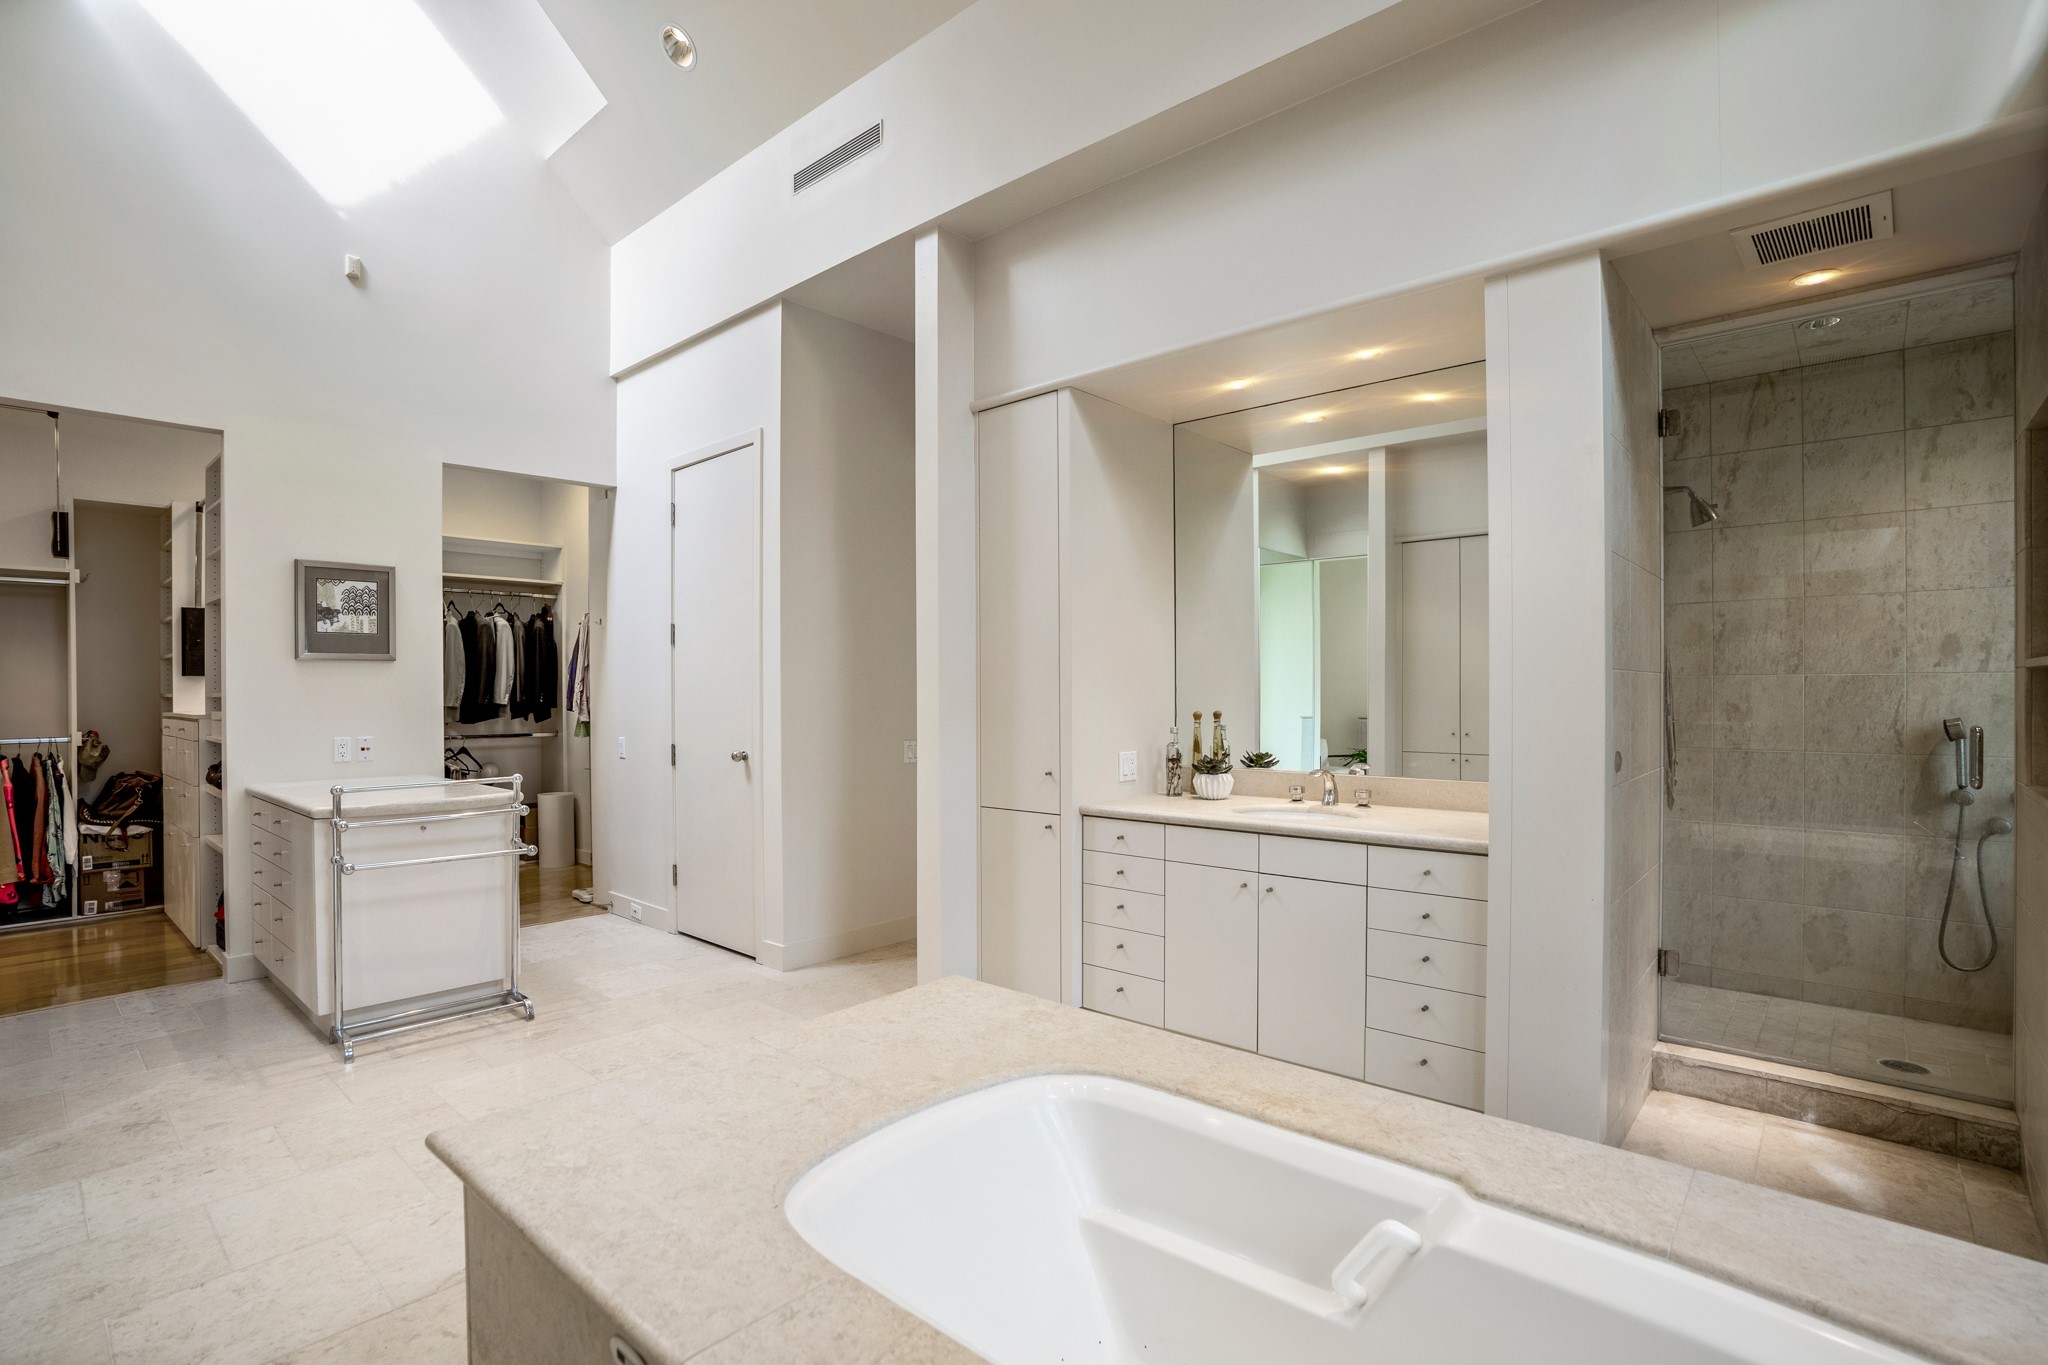 Reverse view of the primary bath retreat featuring two walk-in closets. Stand-up shower on the right. Closed door is the water closet. Inside this room to your left is a zen space. Scroll to see picture.